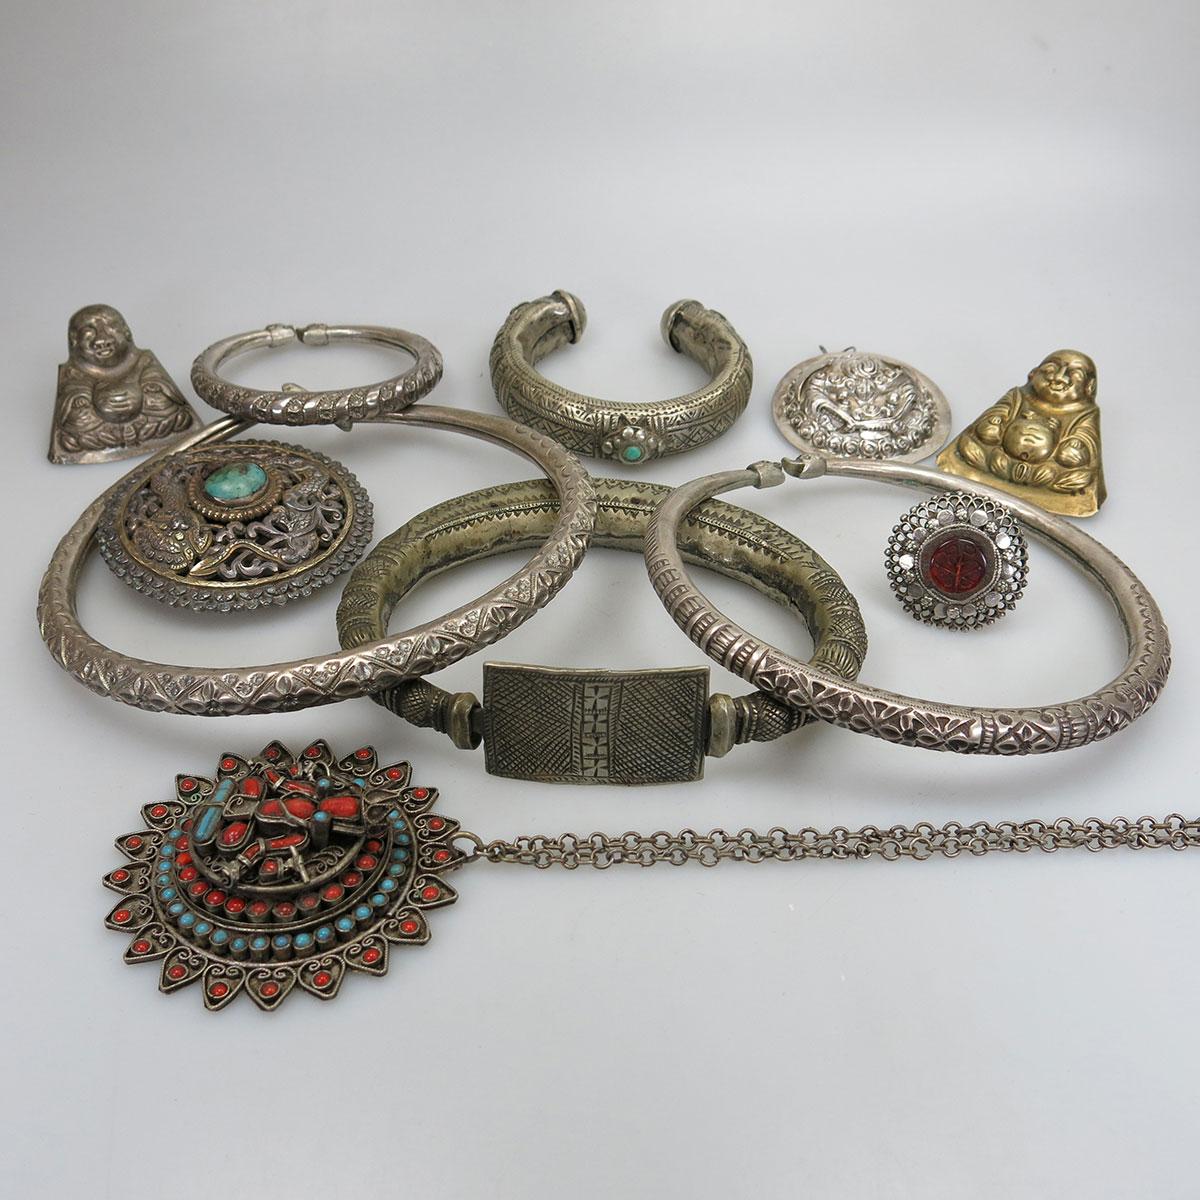 Quantity Of Eastern Silver And Silver-Plated Necklaces And Bangles